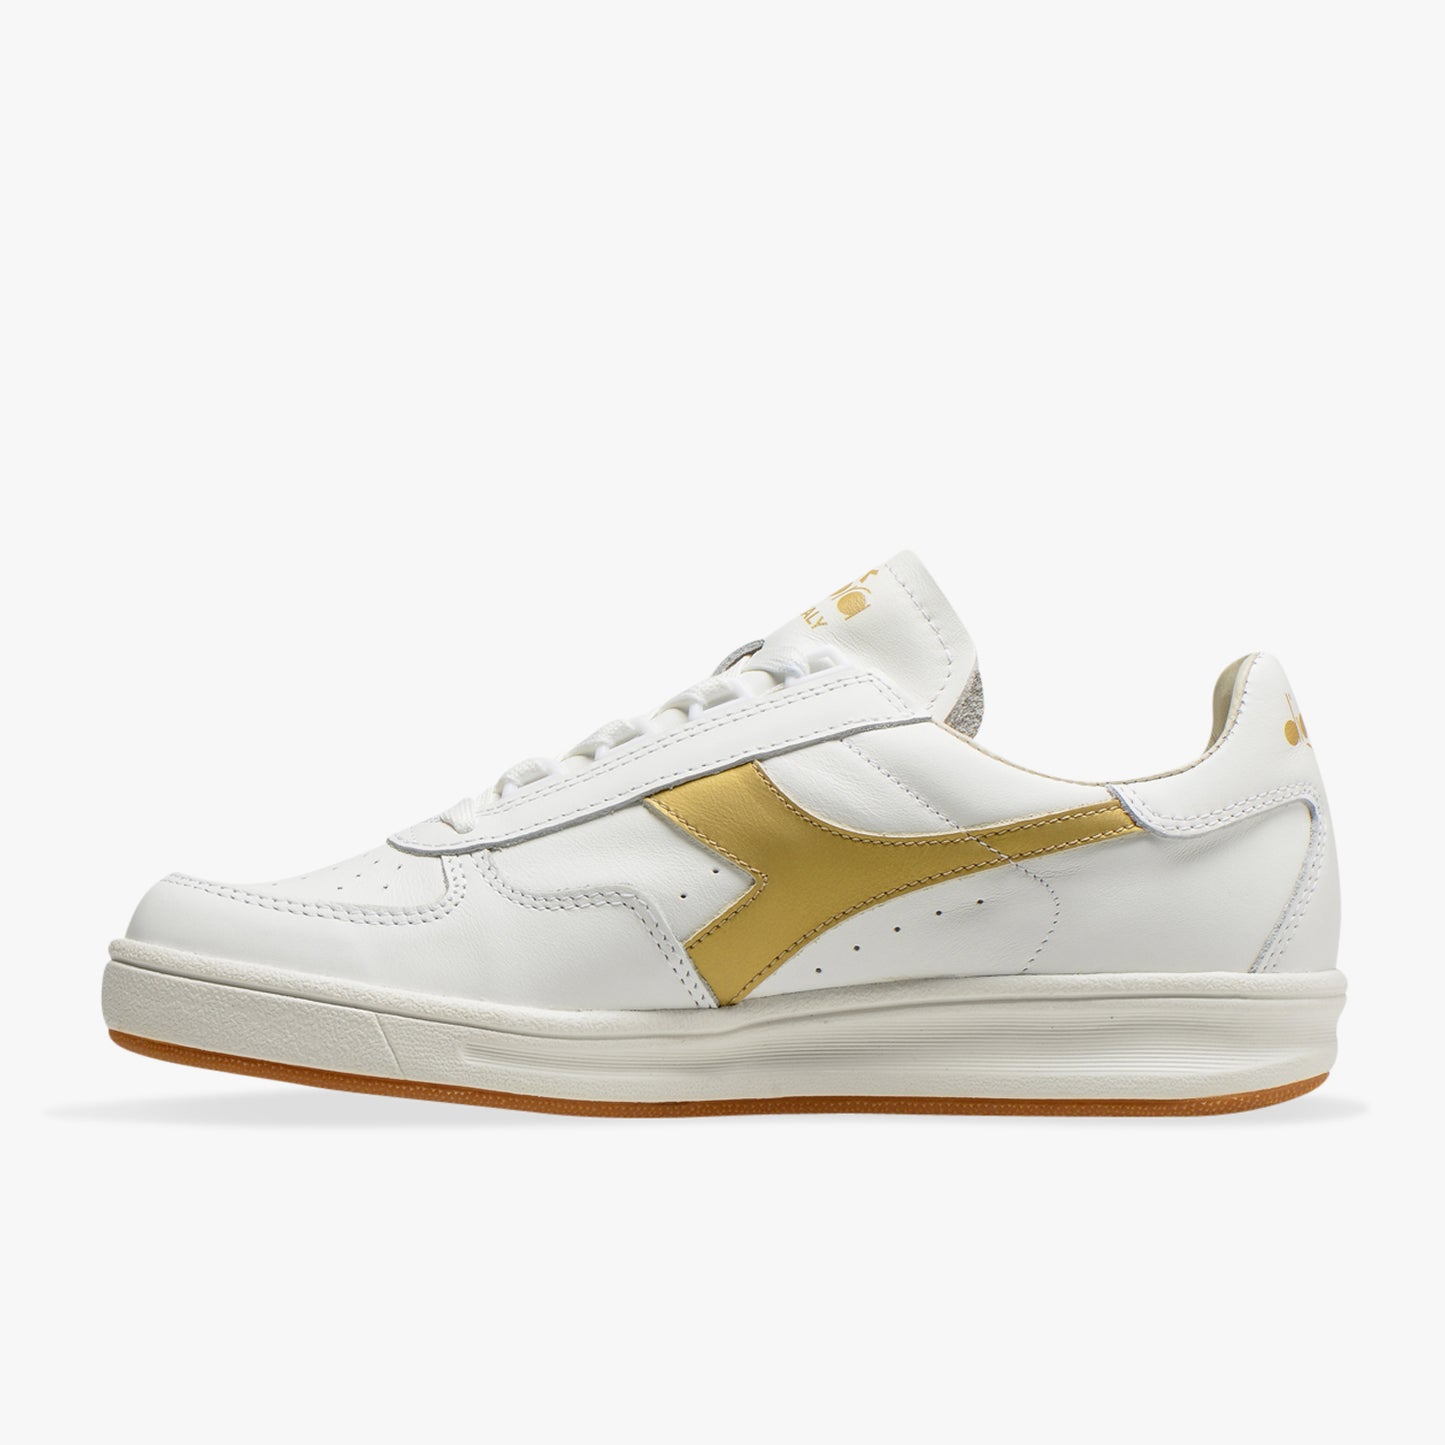 alternate side view of white and gold B. elite h italia sport diadora shoe made in italy